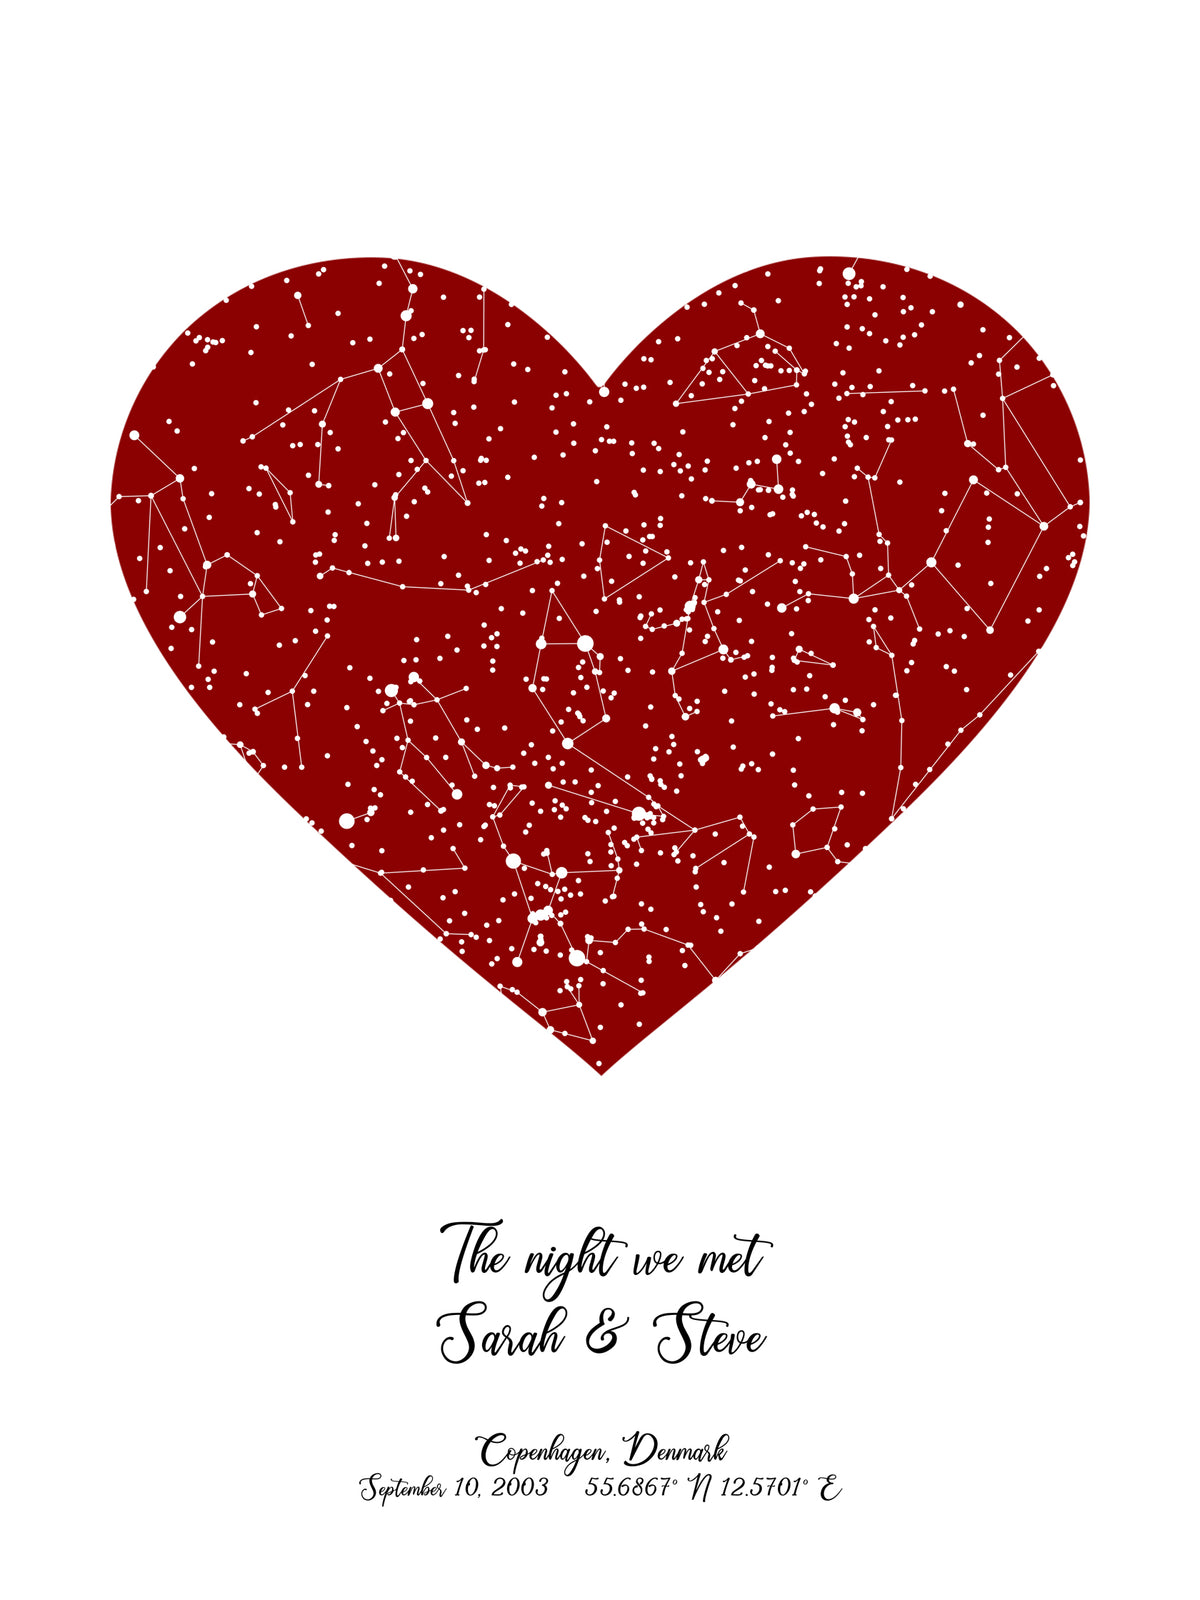 A detailed photo of a red heart night sky by date poster, with the quote "The night we met"